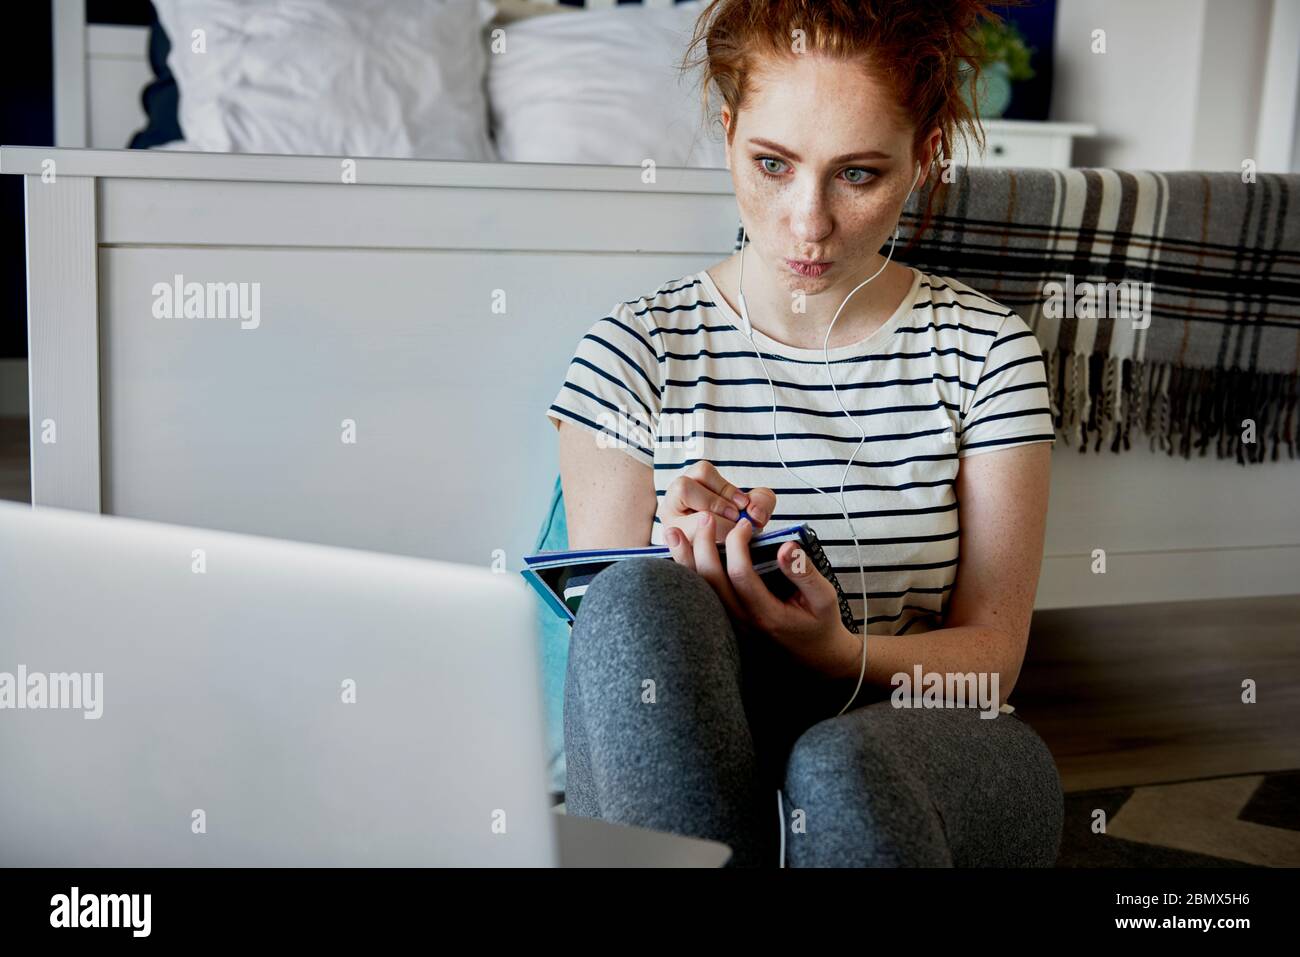 Woman having some problems with E-learning Stock Photo